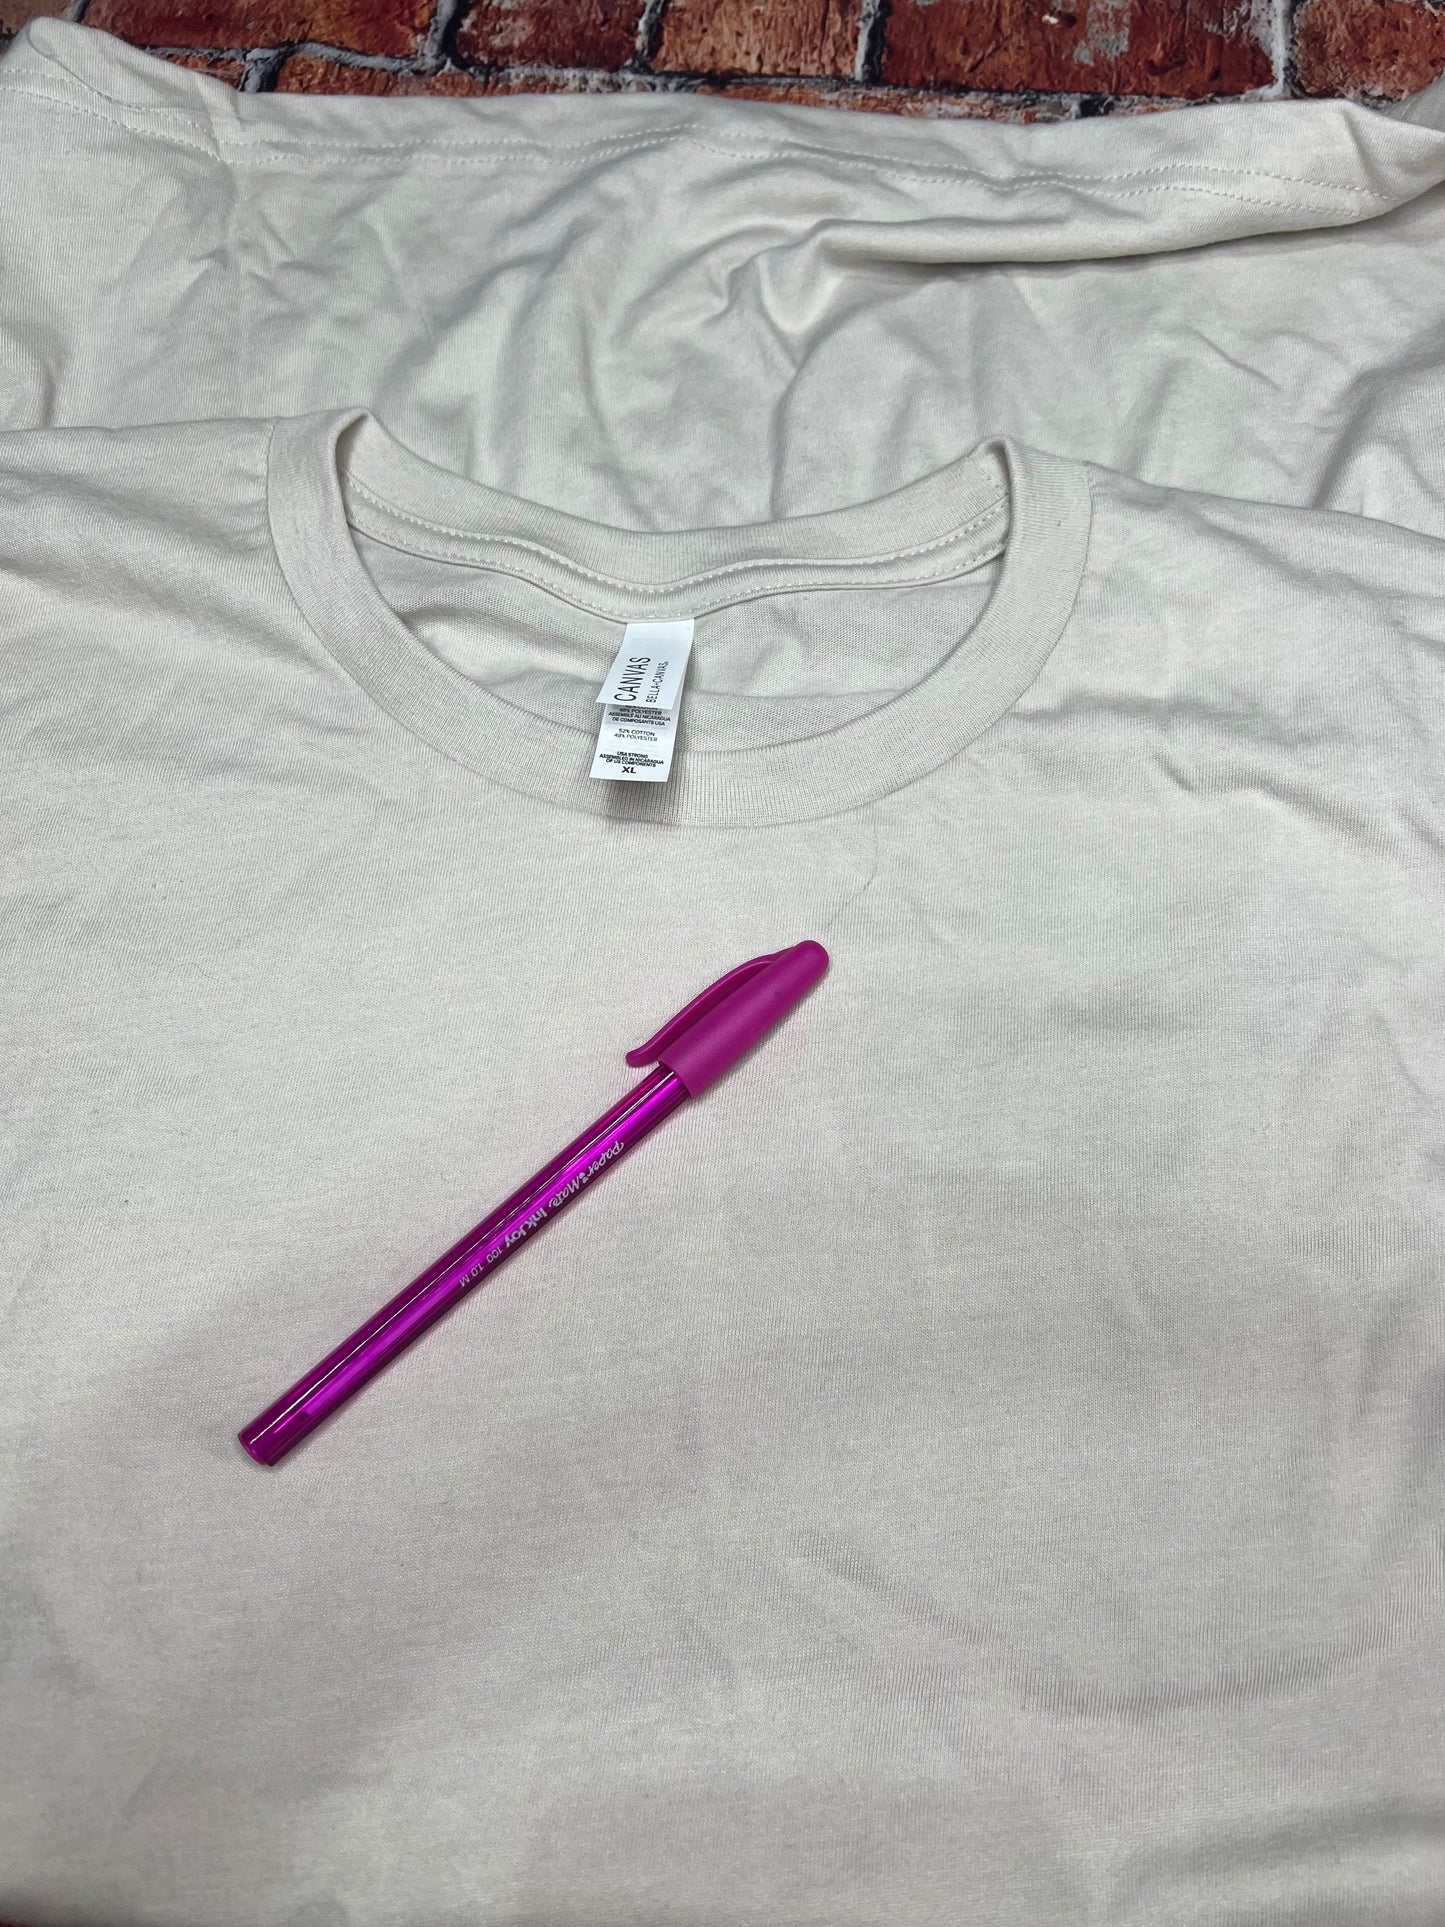 XL - NATURAL BLANK UNISEX T-SHIRT with pen mark by collar (see pink pen for location & size)